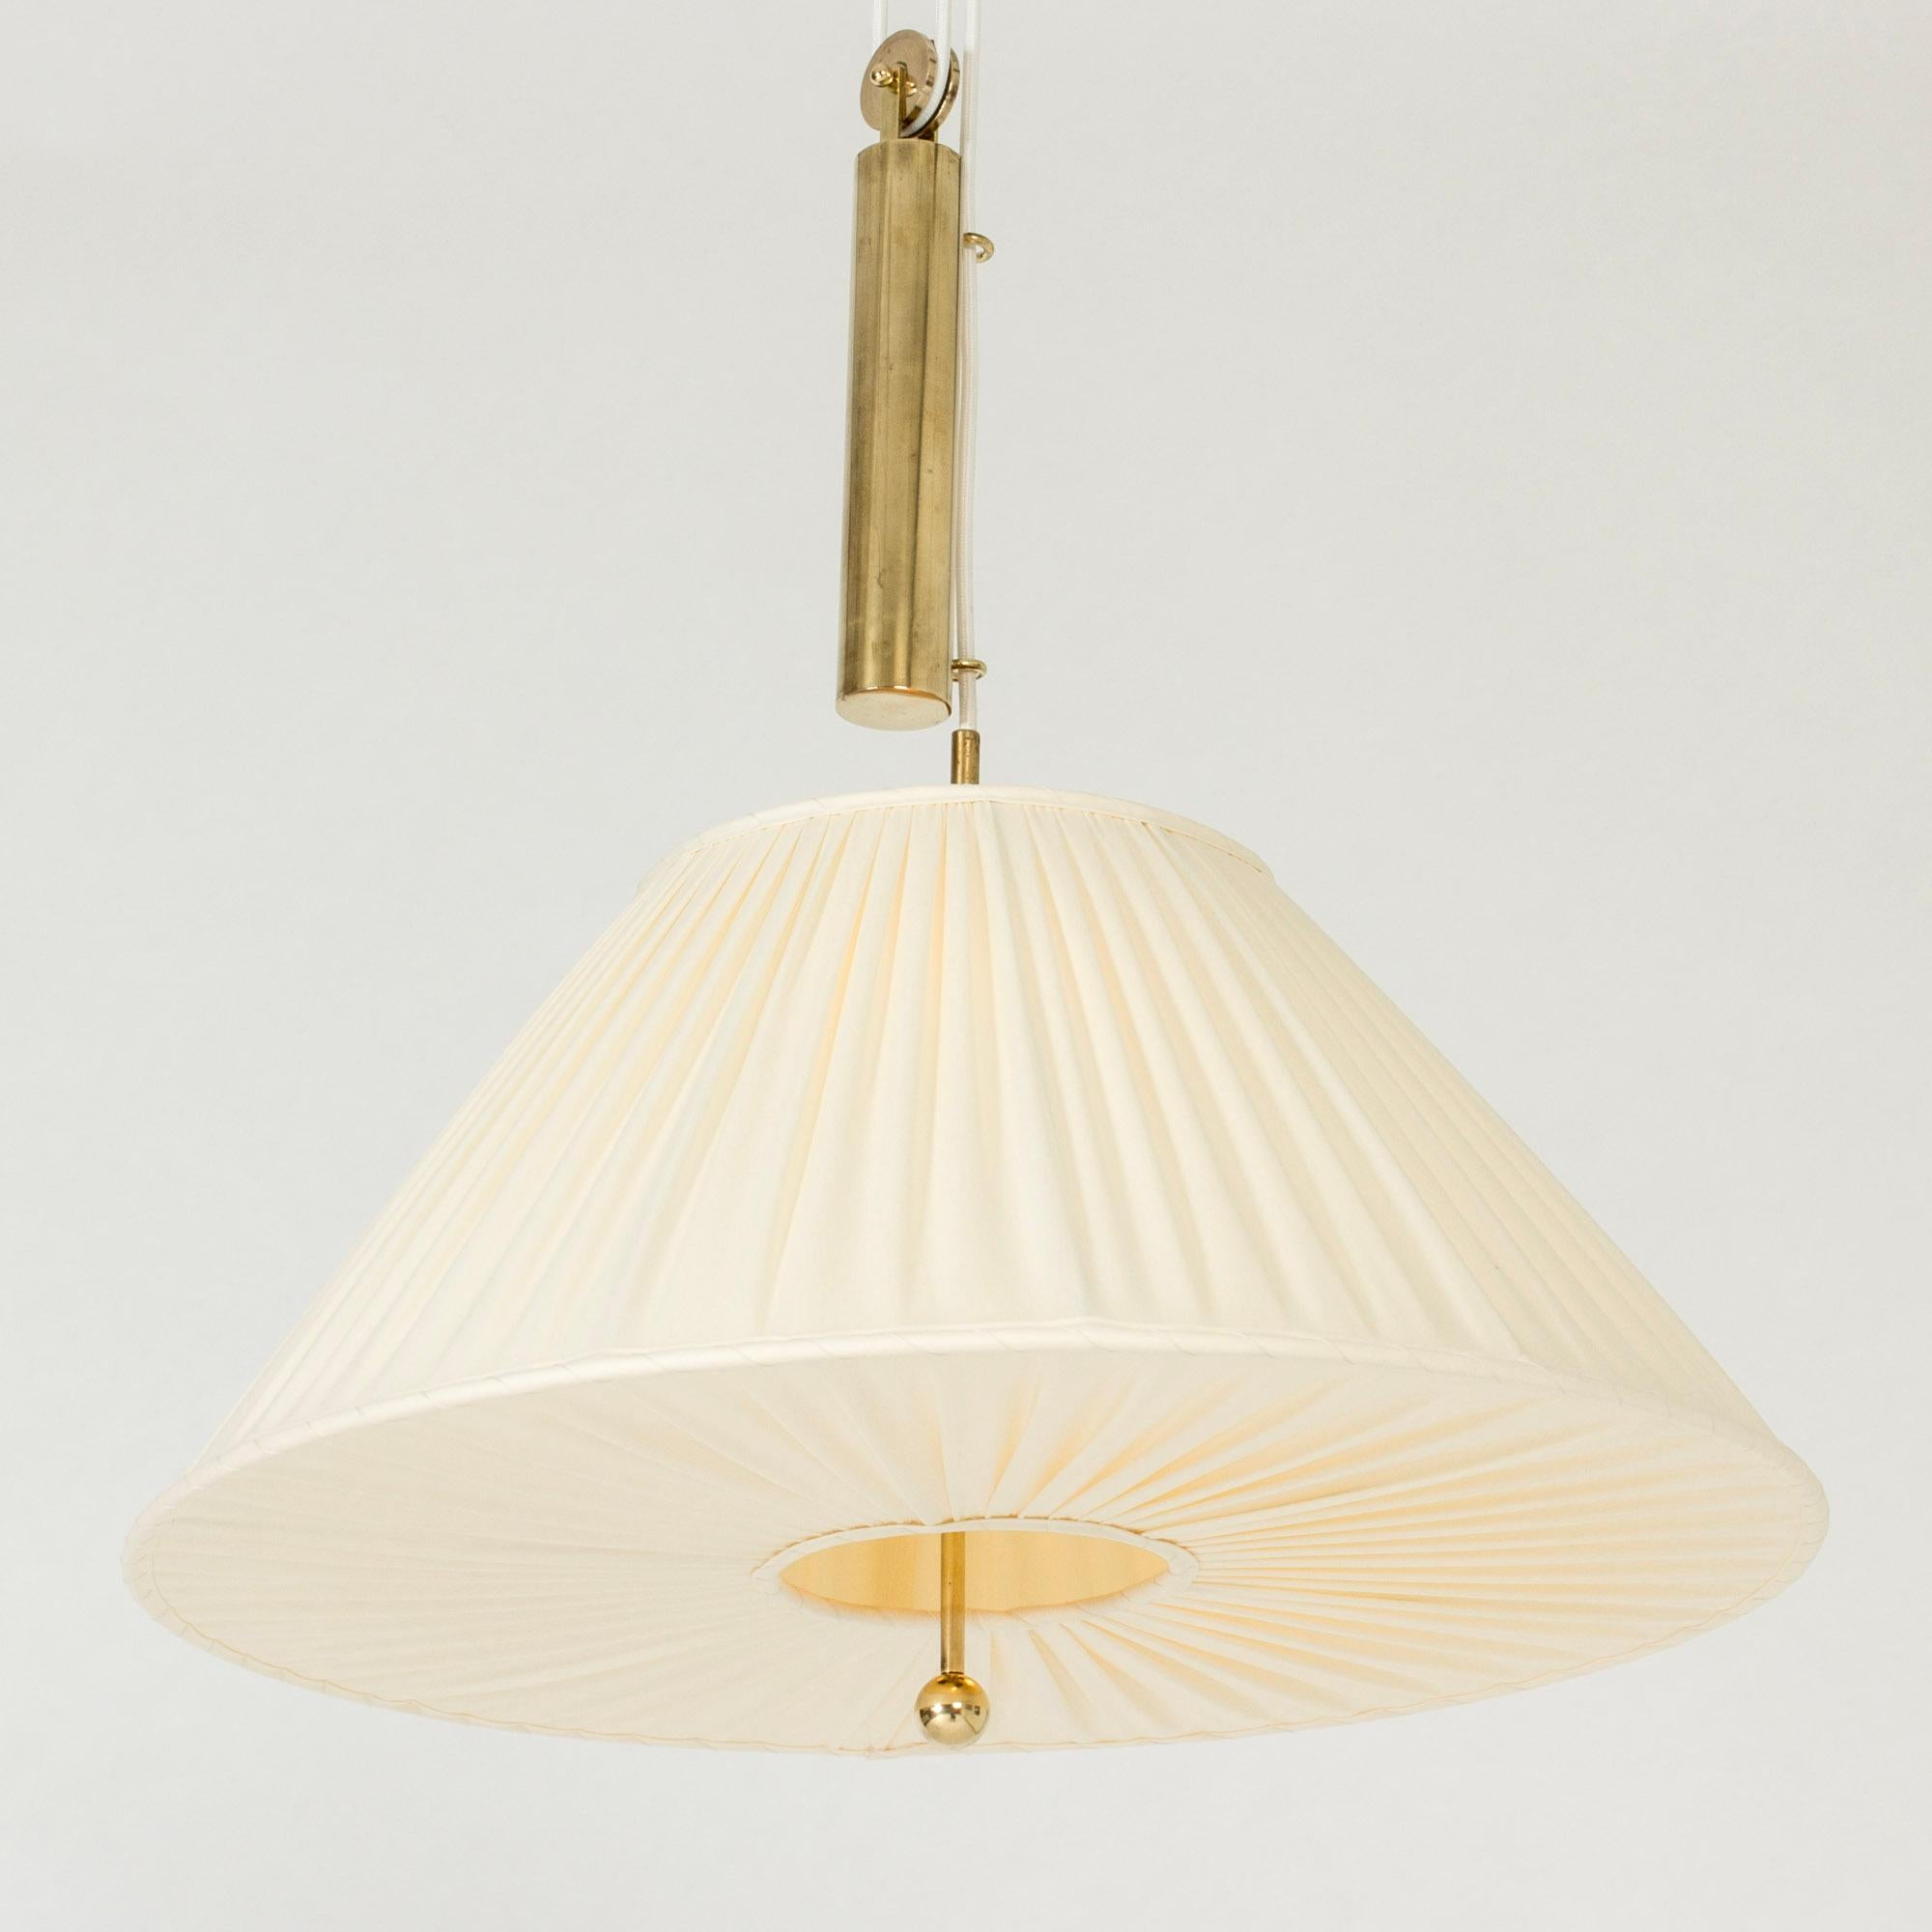 Beautiful brass pendant light by Josef Frank, in an elegant, voluminous design. Shade made from pleated fabric. Decorative brass ball coming out at the bottom, brass weight for adjusting the height.

Height 120-220 cm (adjustable).